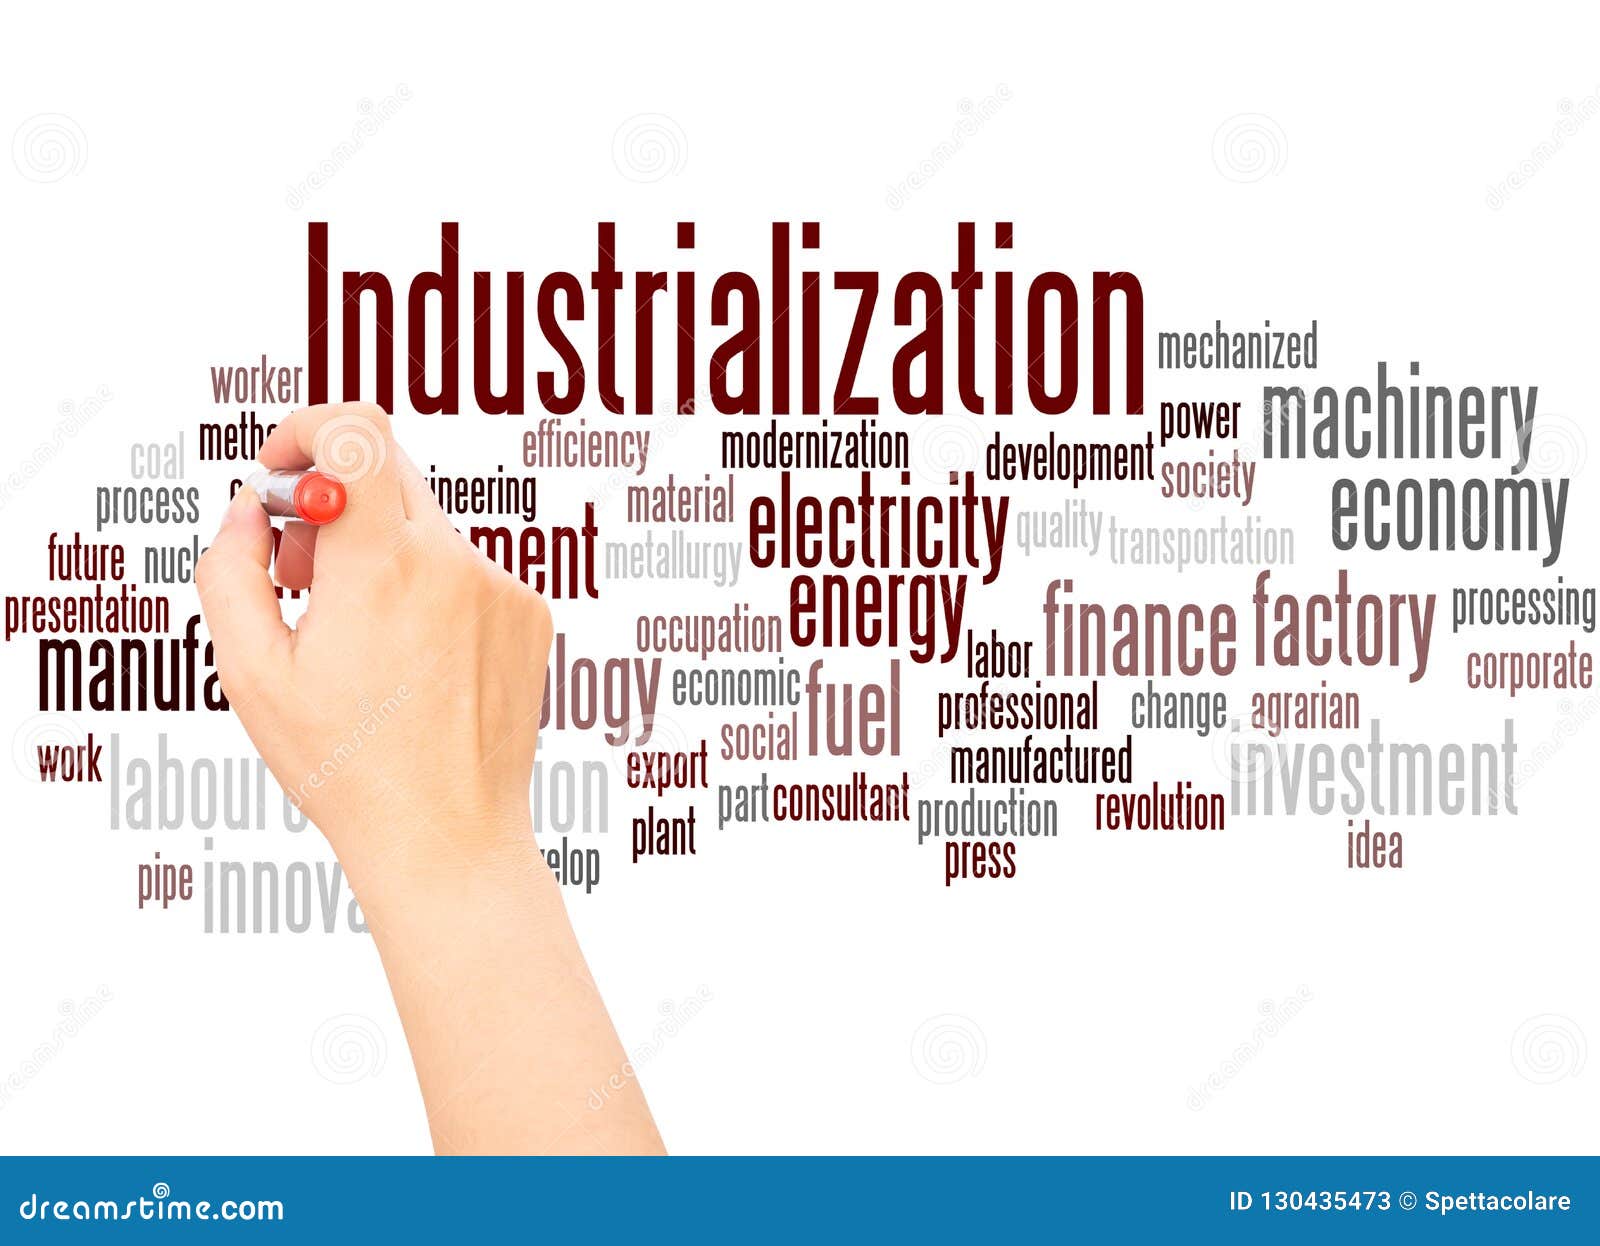 industrialization word cloud hand writing concept